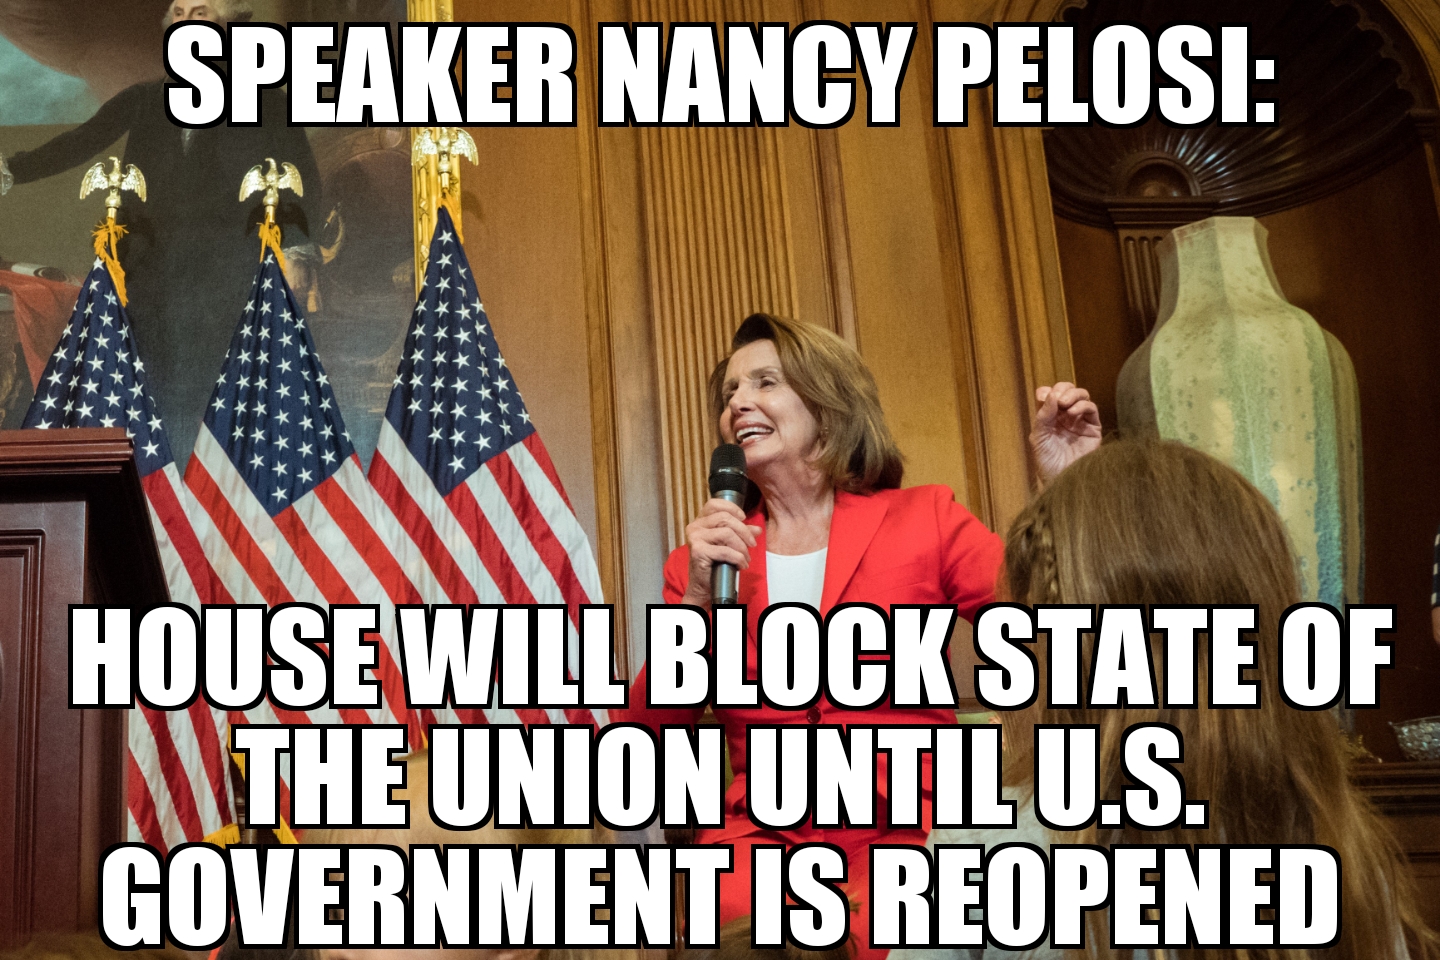 Pelosi: House will block State of the Union until after Government Shutdown